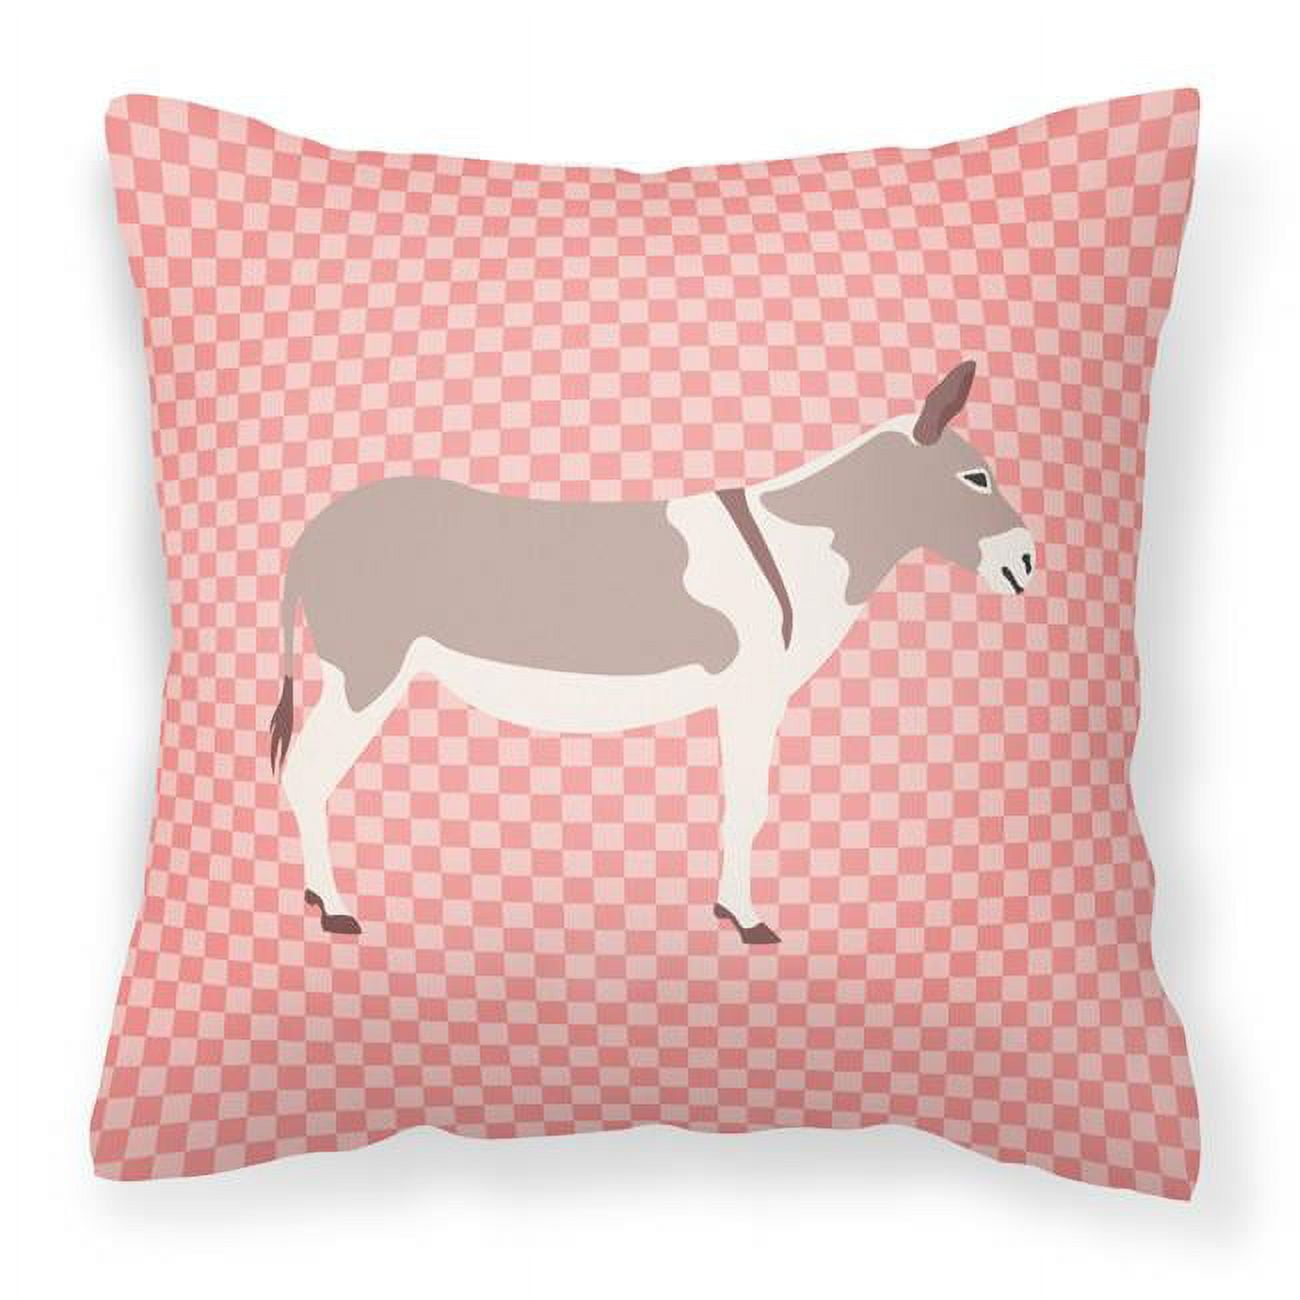 JensenDistributionServices Australian Teamster Donkey Pink Check Fabric Decorative Pillow - 18 x 18 in.